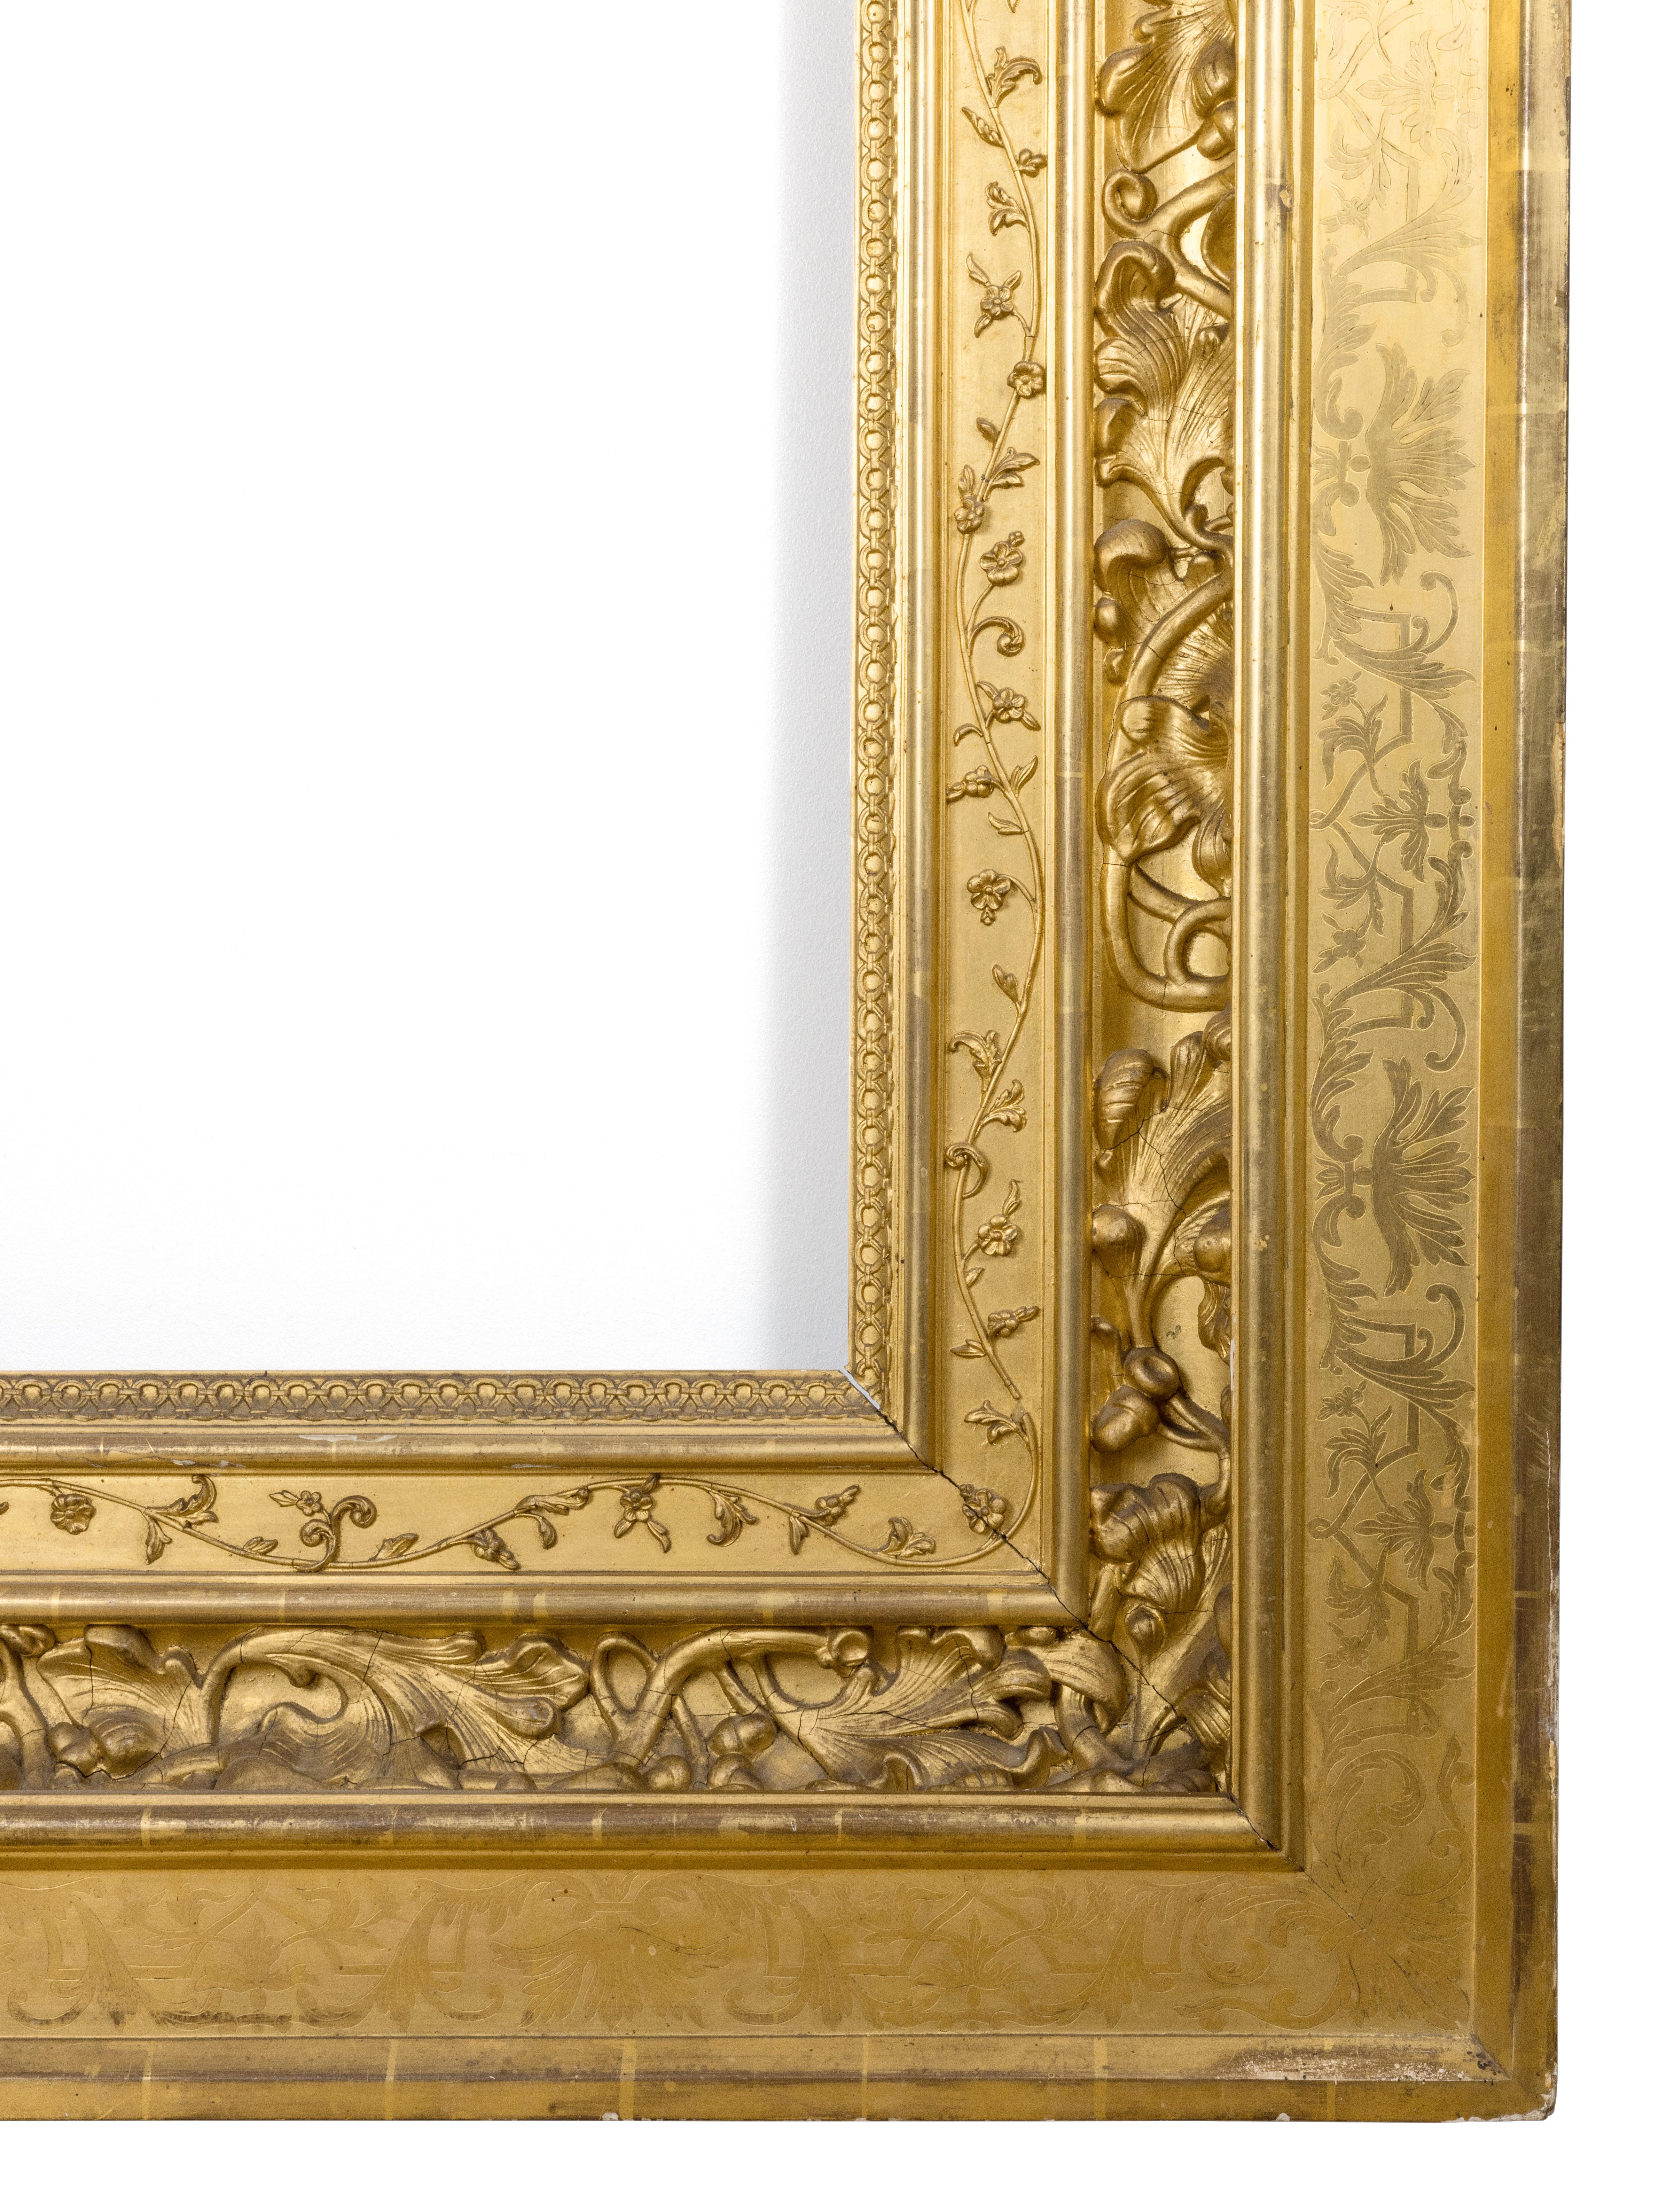 Very Large Renaissance Revival Gilded French Frame 19th Century, Circa 1835 For Sale 1